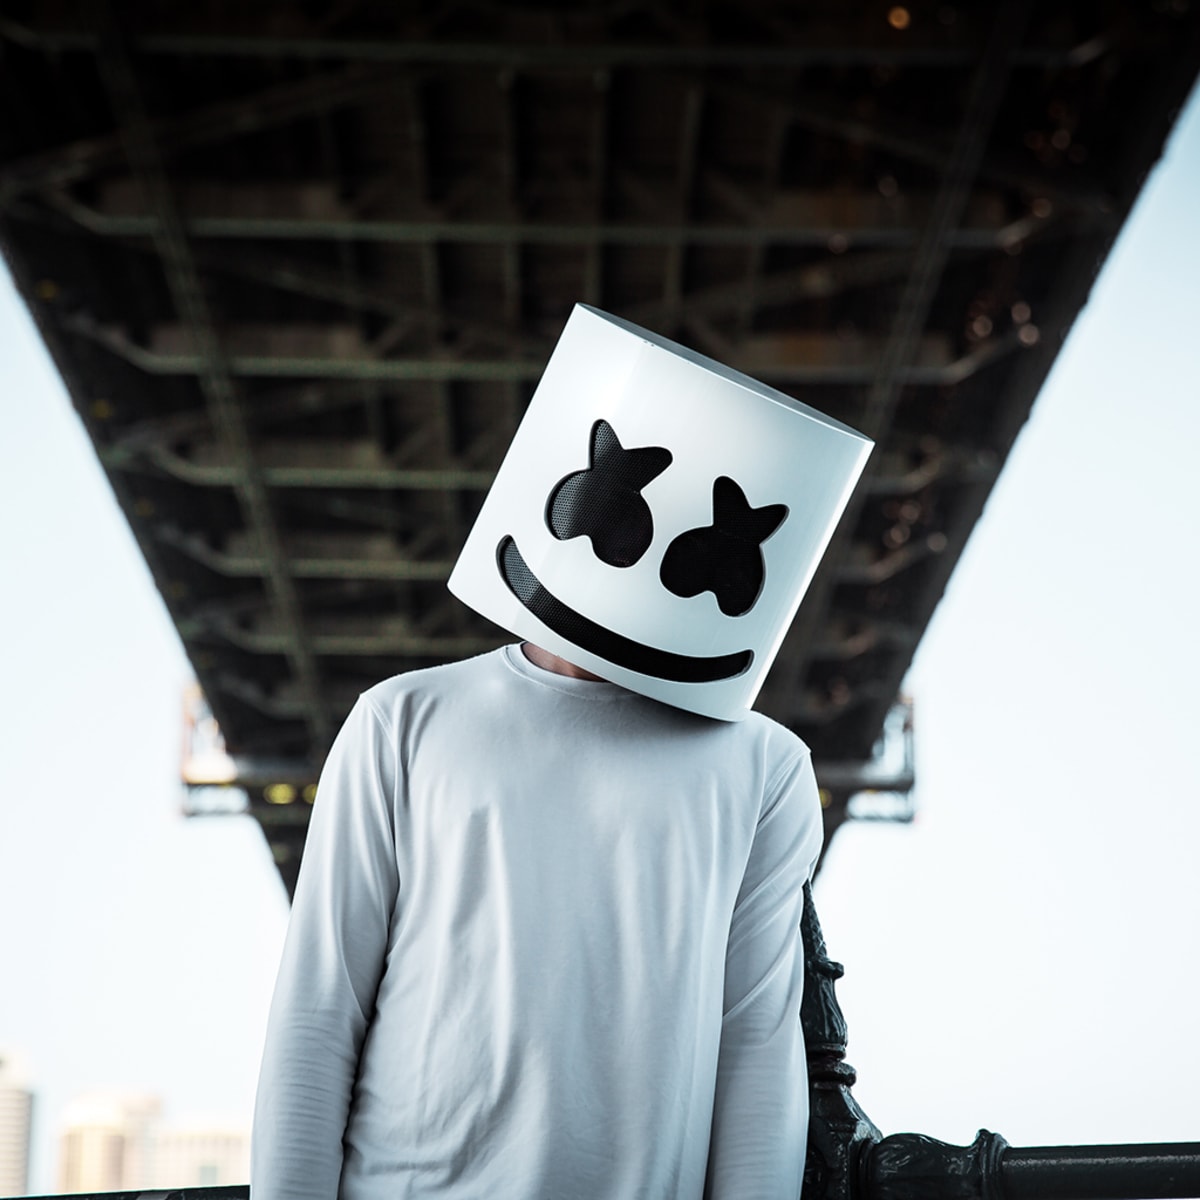 Happier By Marshmello And Bastille Reaches 50 Straight Weeks At